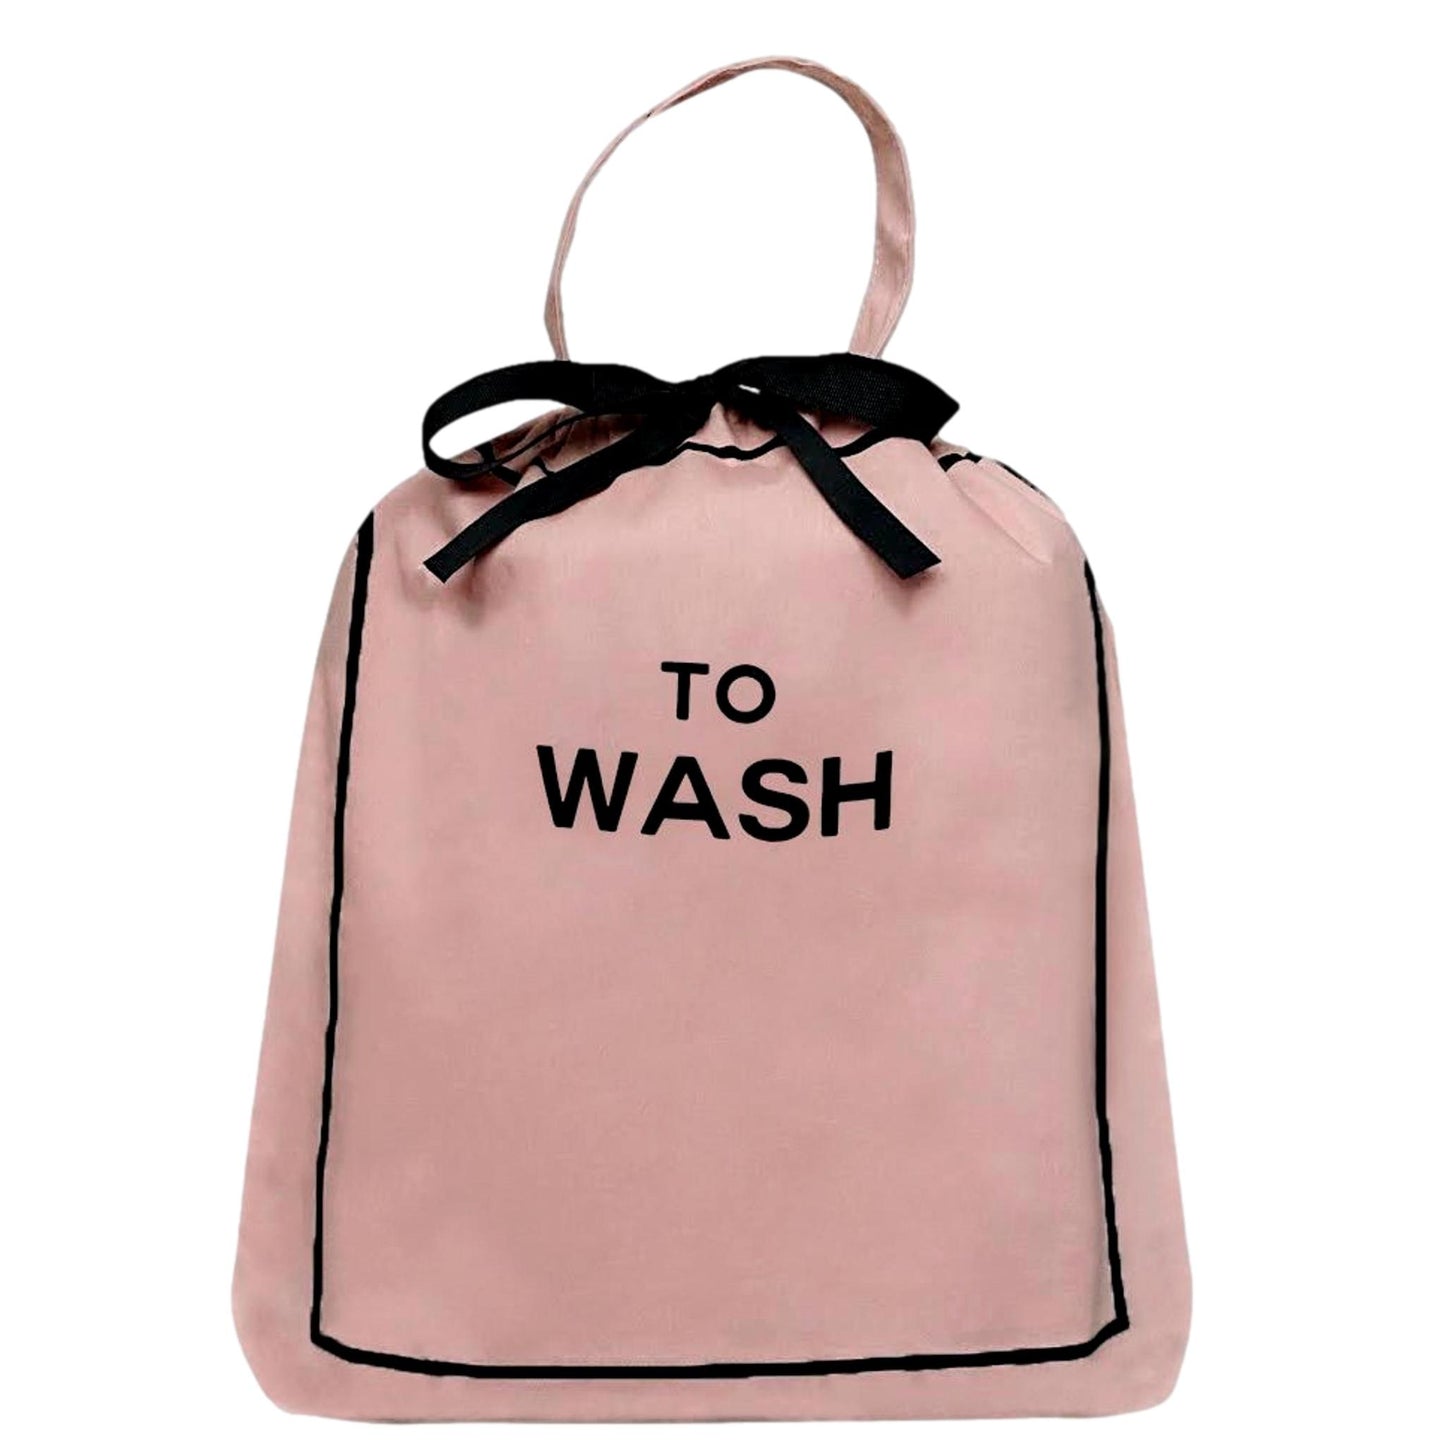 To Wash Laundry Bag Pink - Bag-all Europe